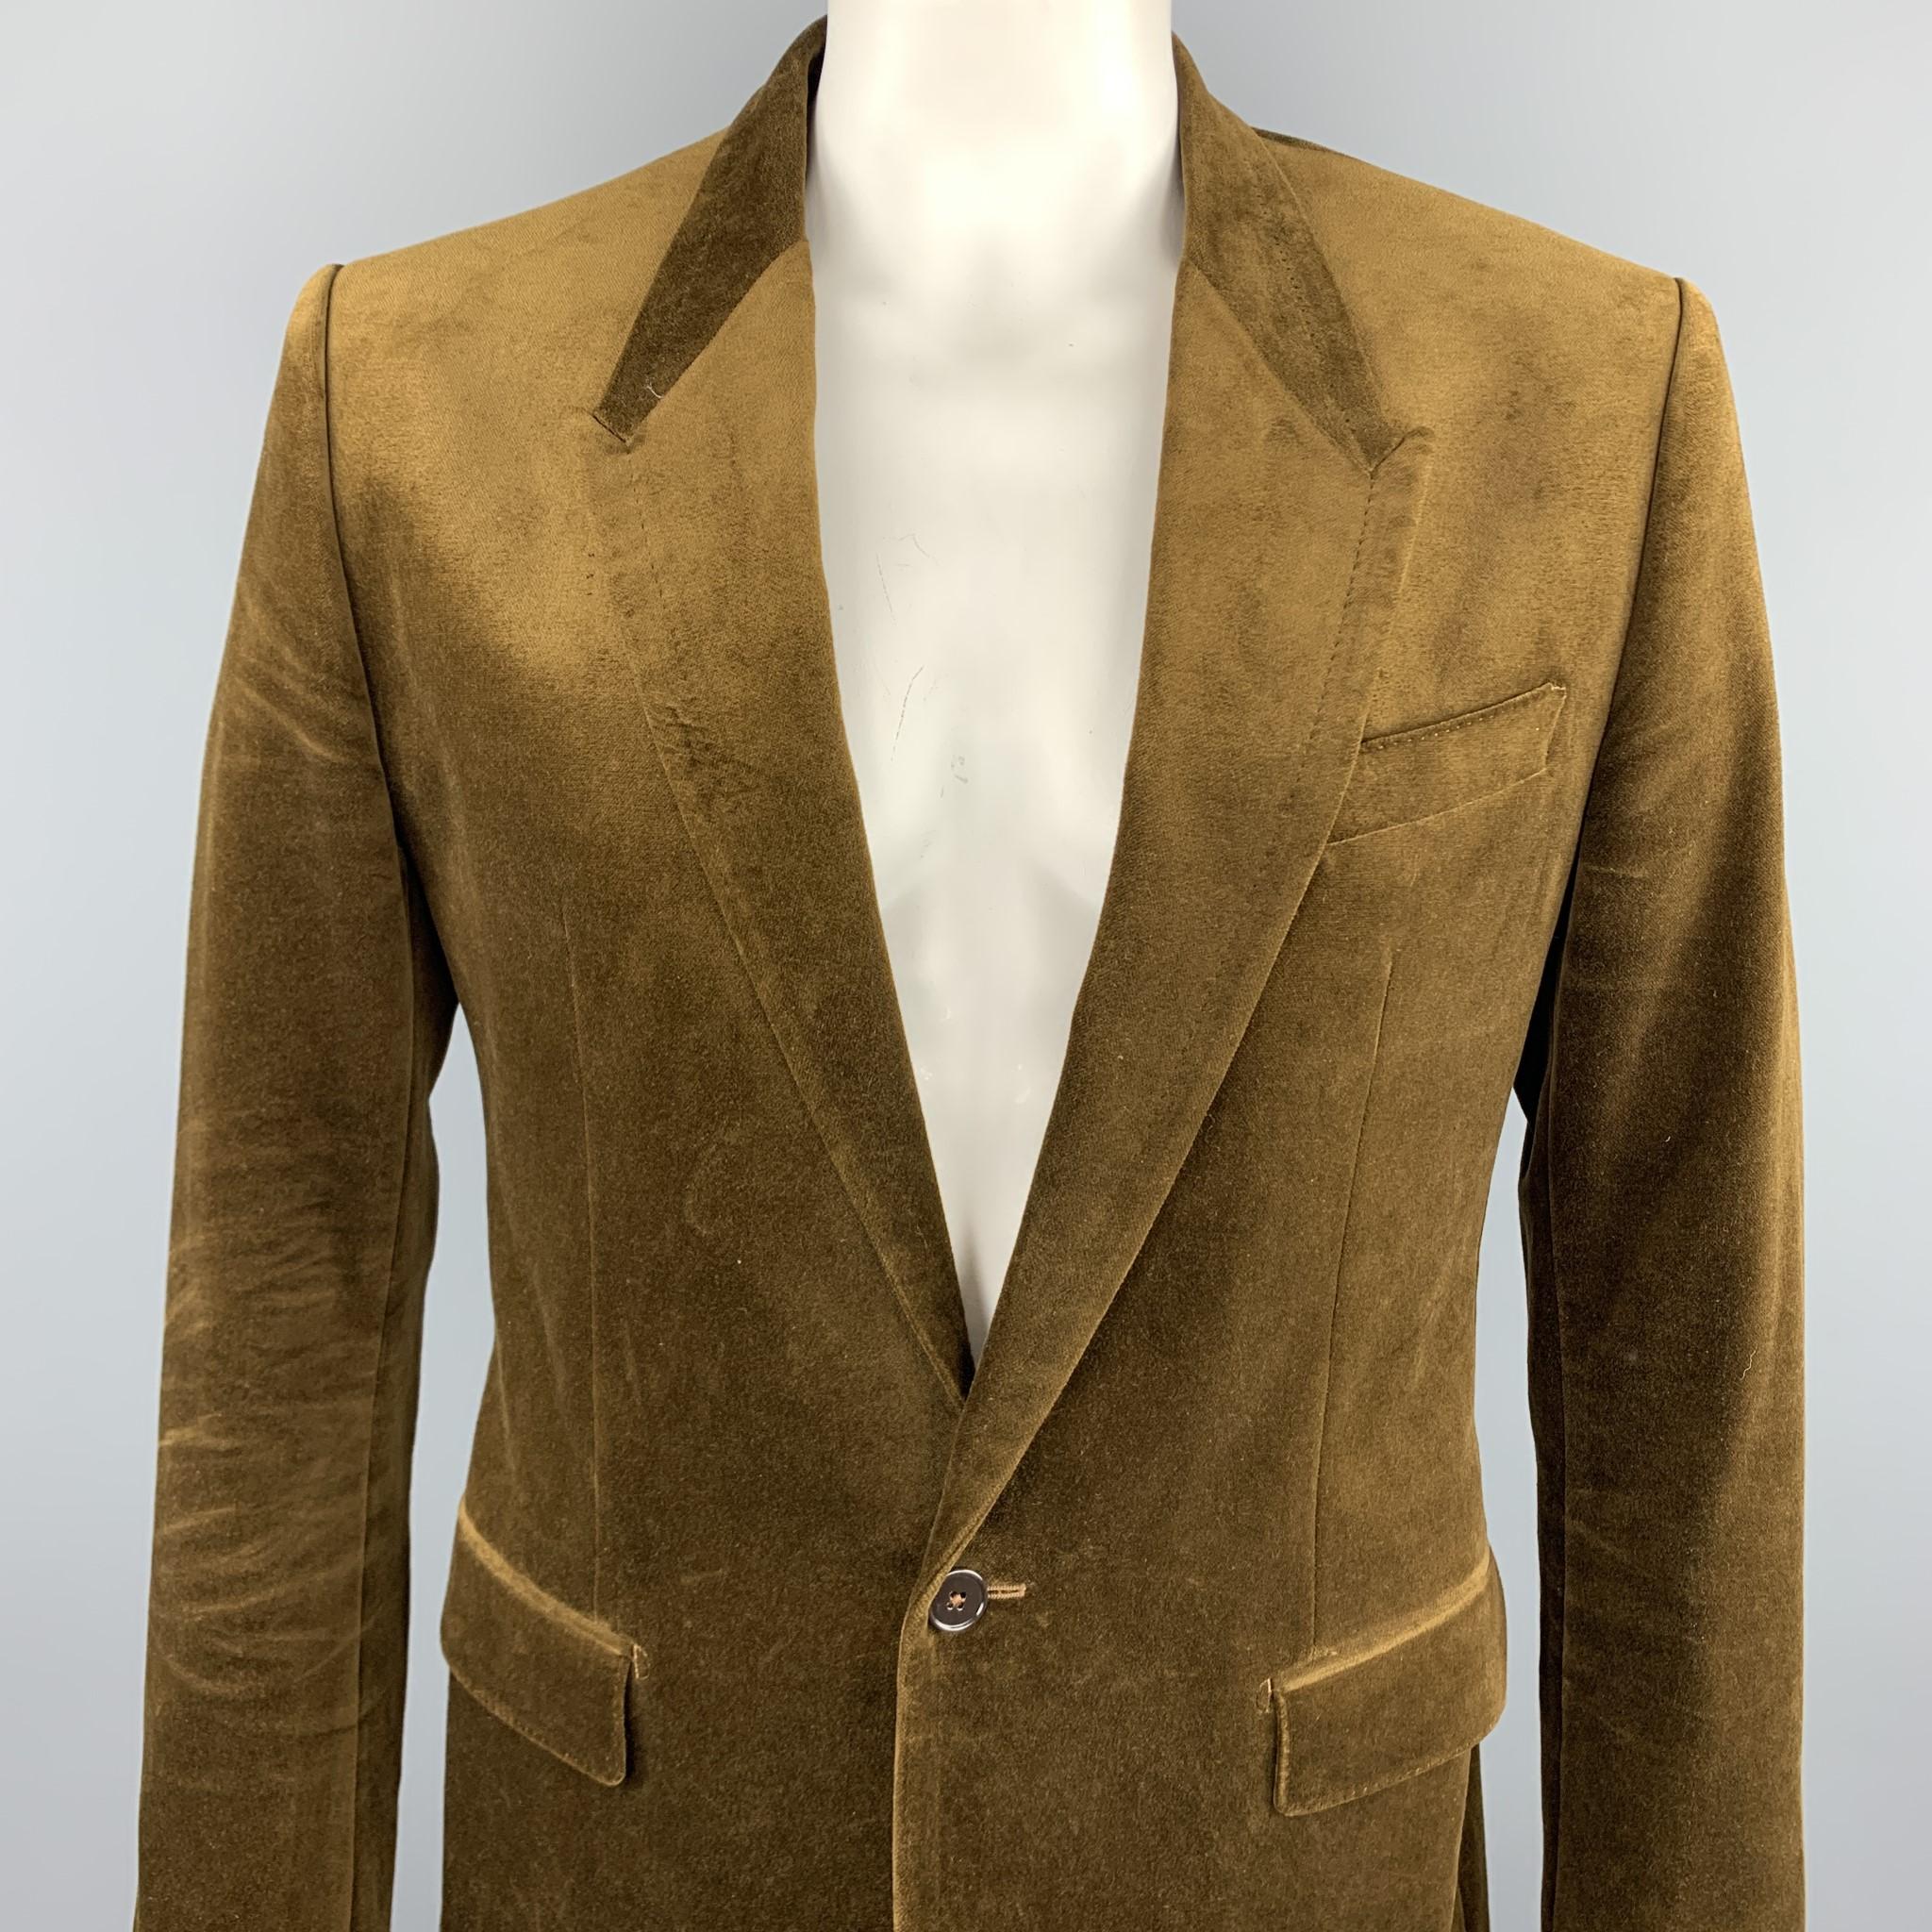 DOLCE & GABBANA sport coat comes in a brown velvet featuring a peak lapel style, flap pockets, and a single button closure. Made in Italy.

Very Good Pre-Owned Condition.
Marked: IT 54

Measurements:

Shoulder: 19 in. 
Chest: 44 in. 
Sleeve: 27 in.